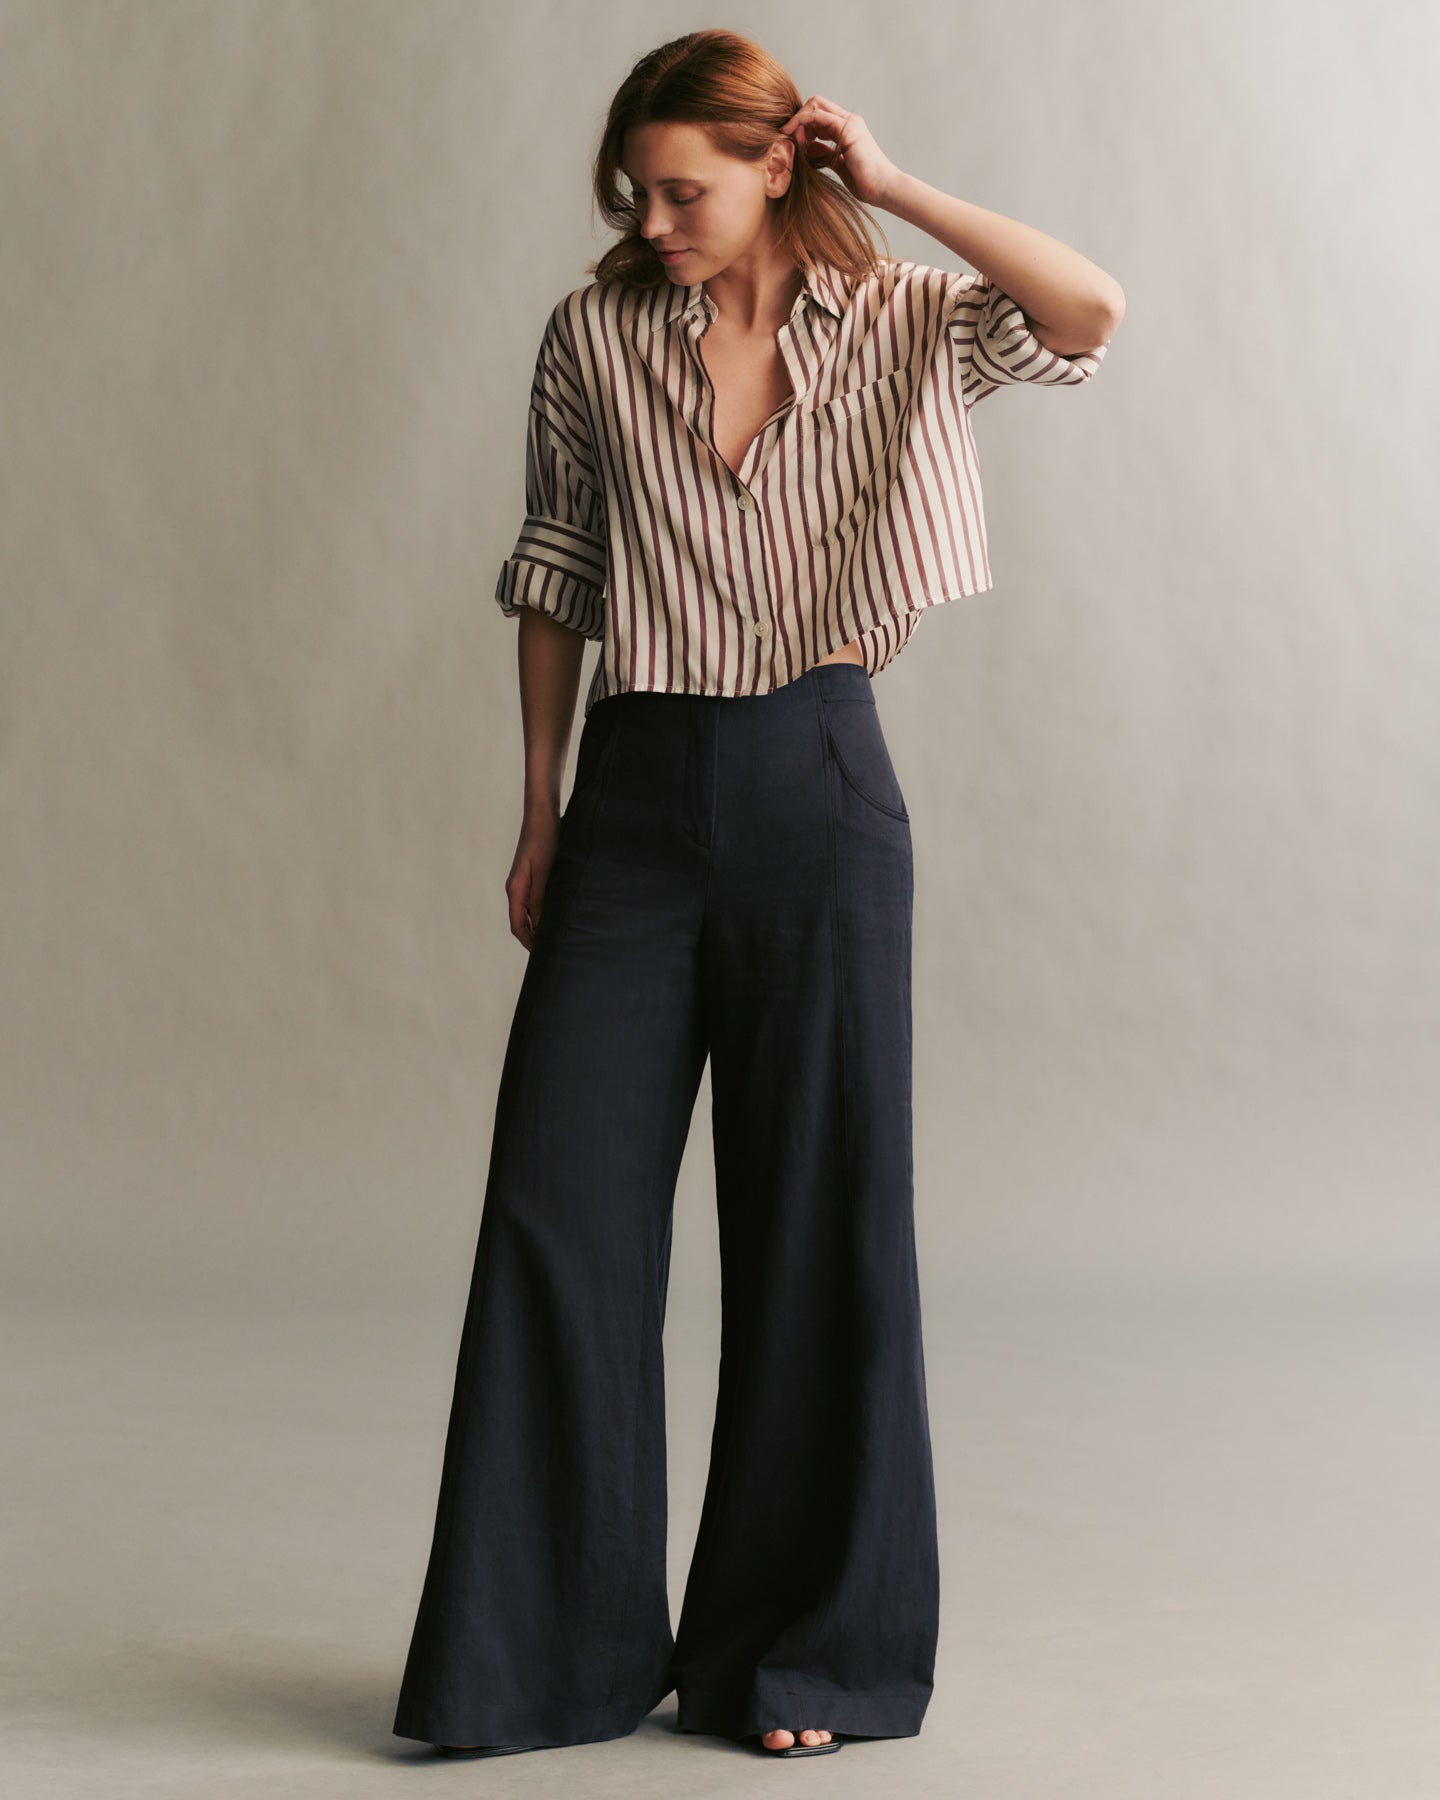 TWP Midnight Demie Pant in linen cotton view 1